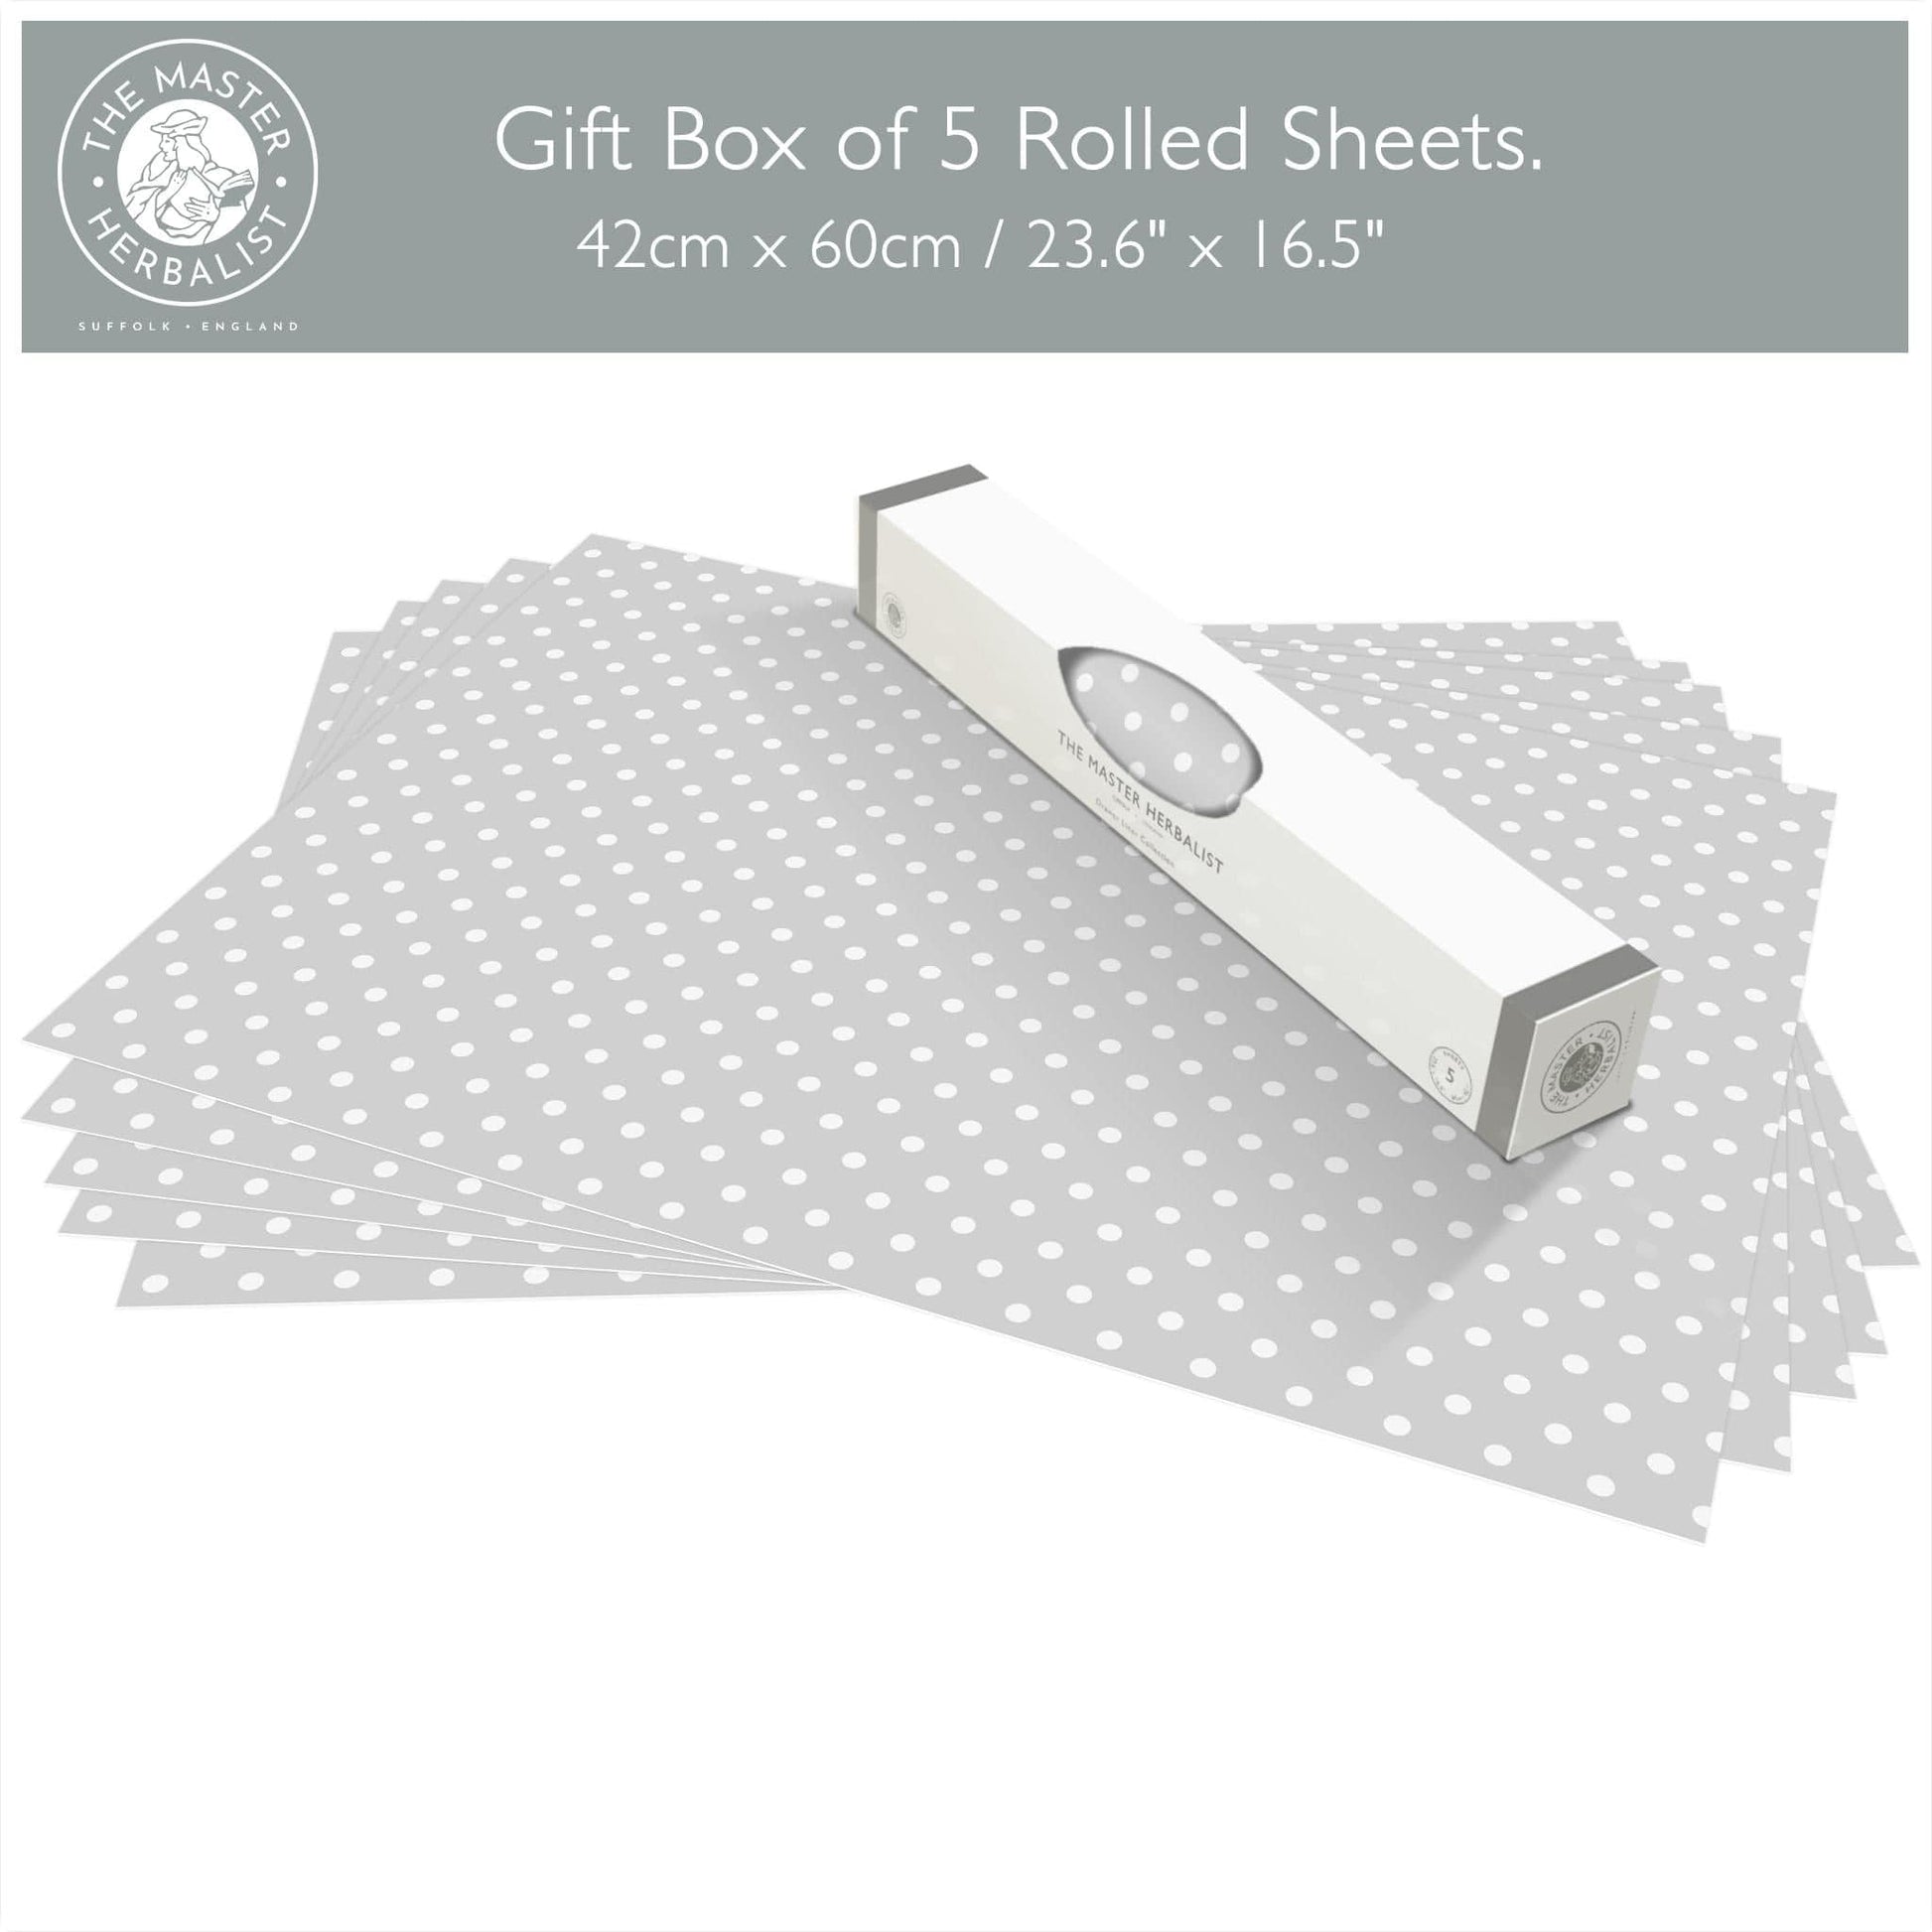 THE MASTER HERBALIST | Wipe Clean & Unscented Drawer Liners in a SOFT GREY POLKA DOT Design. Perfect for Kitchen Drawers, Shelves, Cupboards & Cabinets. Made in Suffolk, England. (Soft Grey)